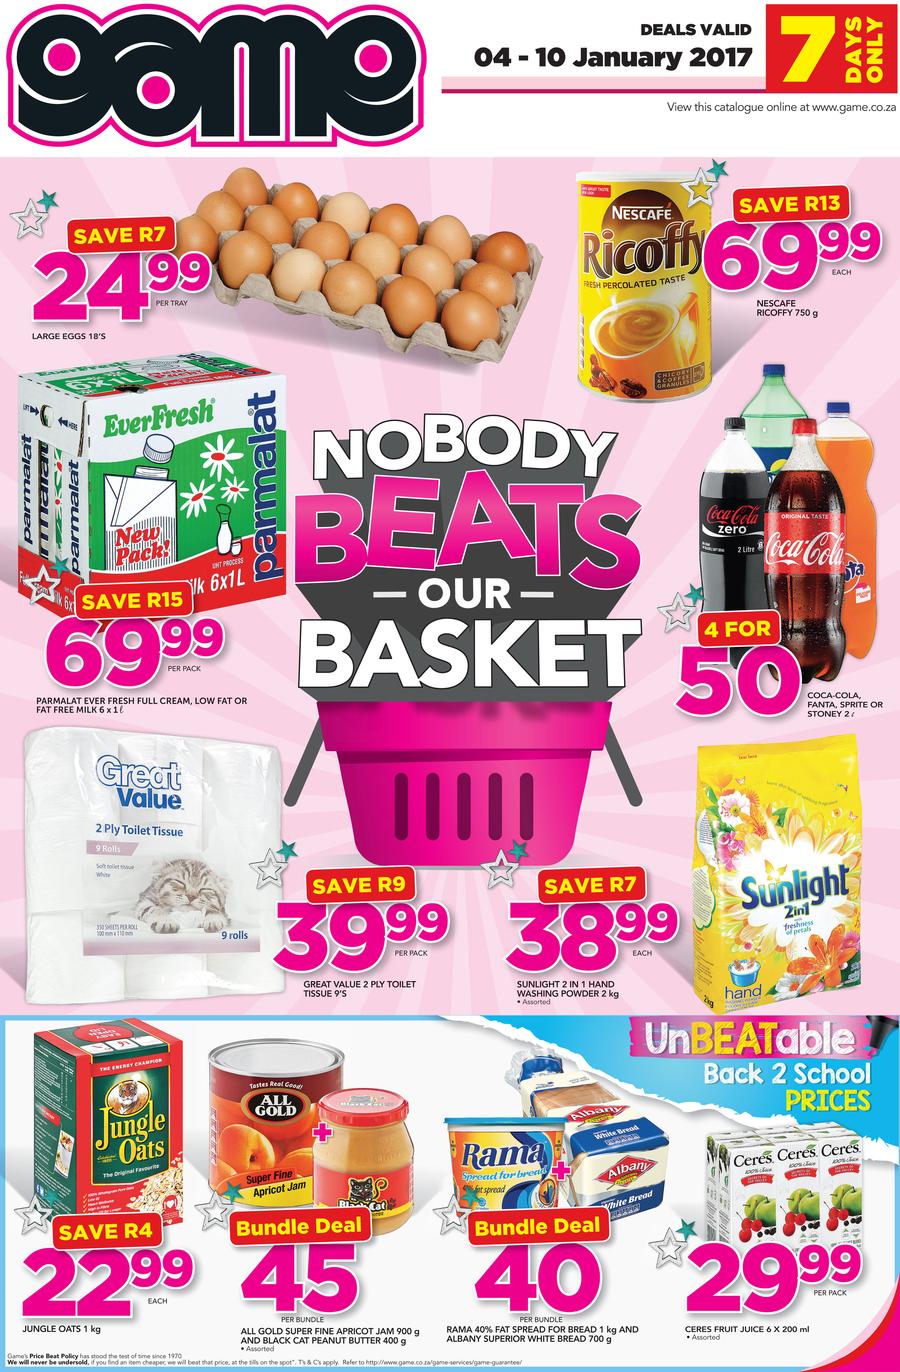 Game : Nobody Beats Our Basket